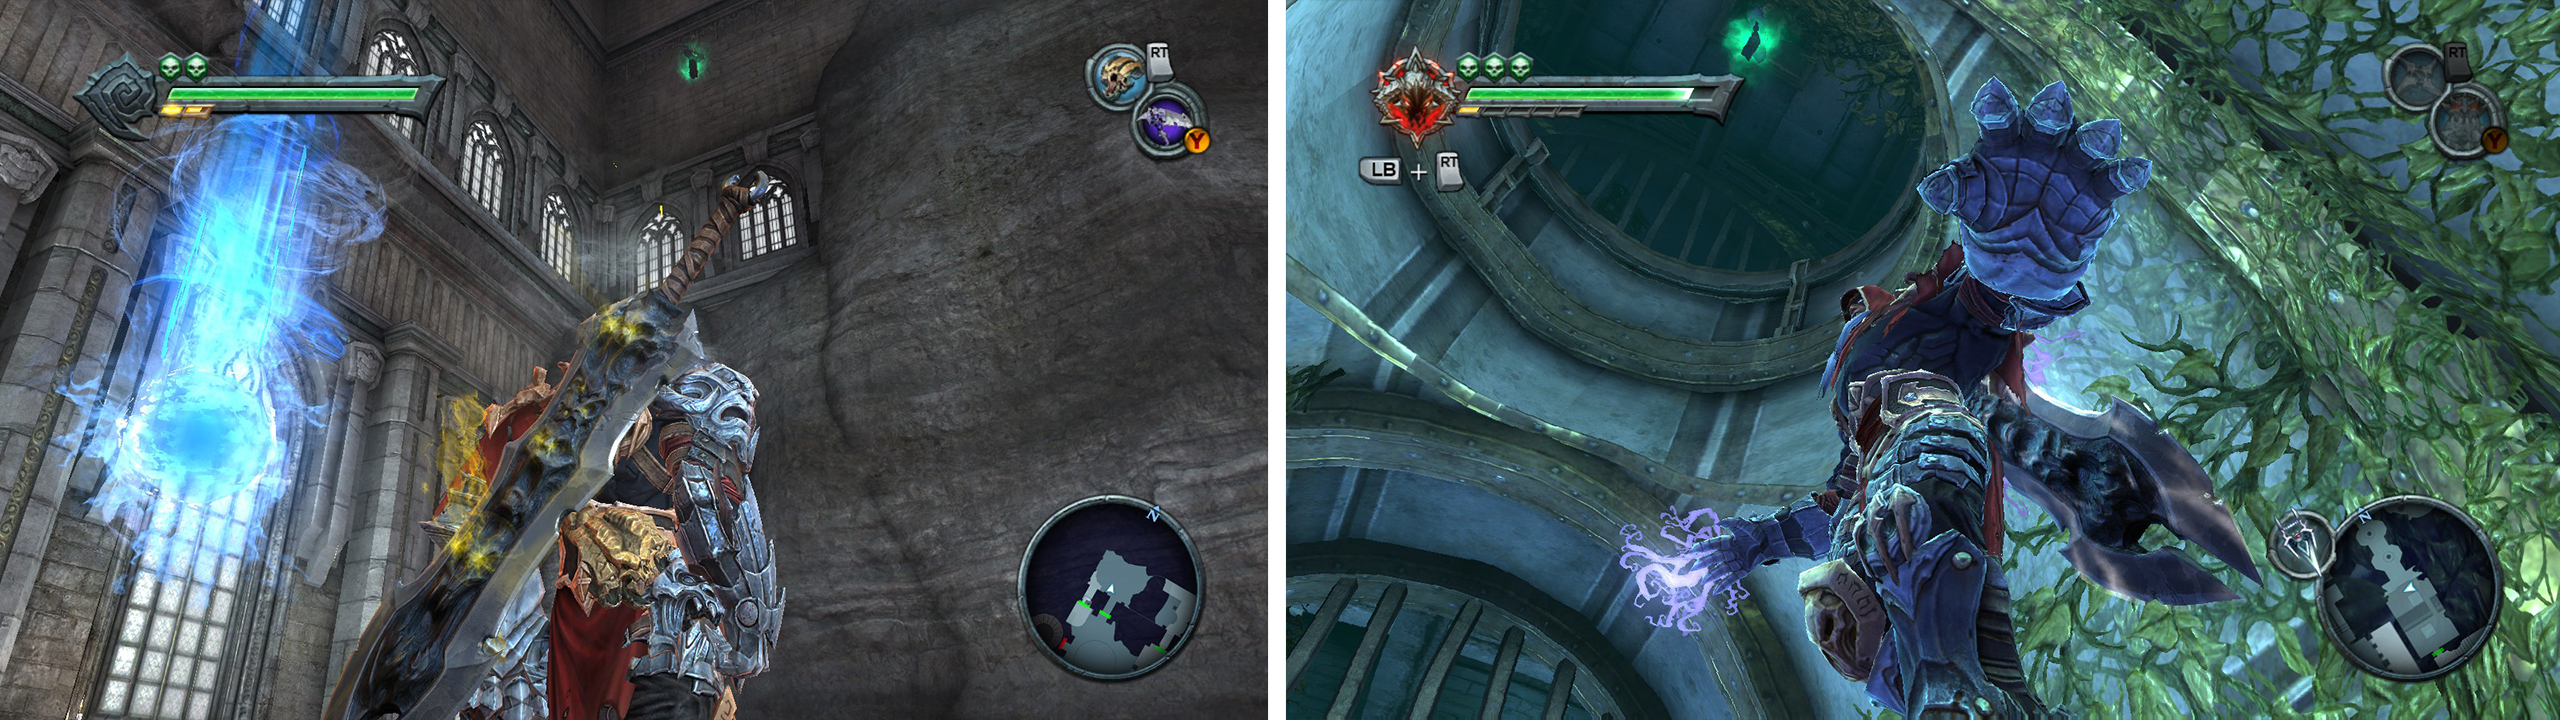 Twilight Cathedral: after blowing up a red crystal Use the shadowflight geyser to reach the Artefact (left). The Hollows: return through the room that is now filled with water after grabbing the third Beholder’s Key, swim into the pipe below the surface to find an Artefact (right).